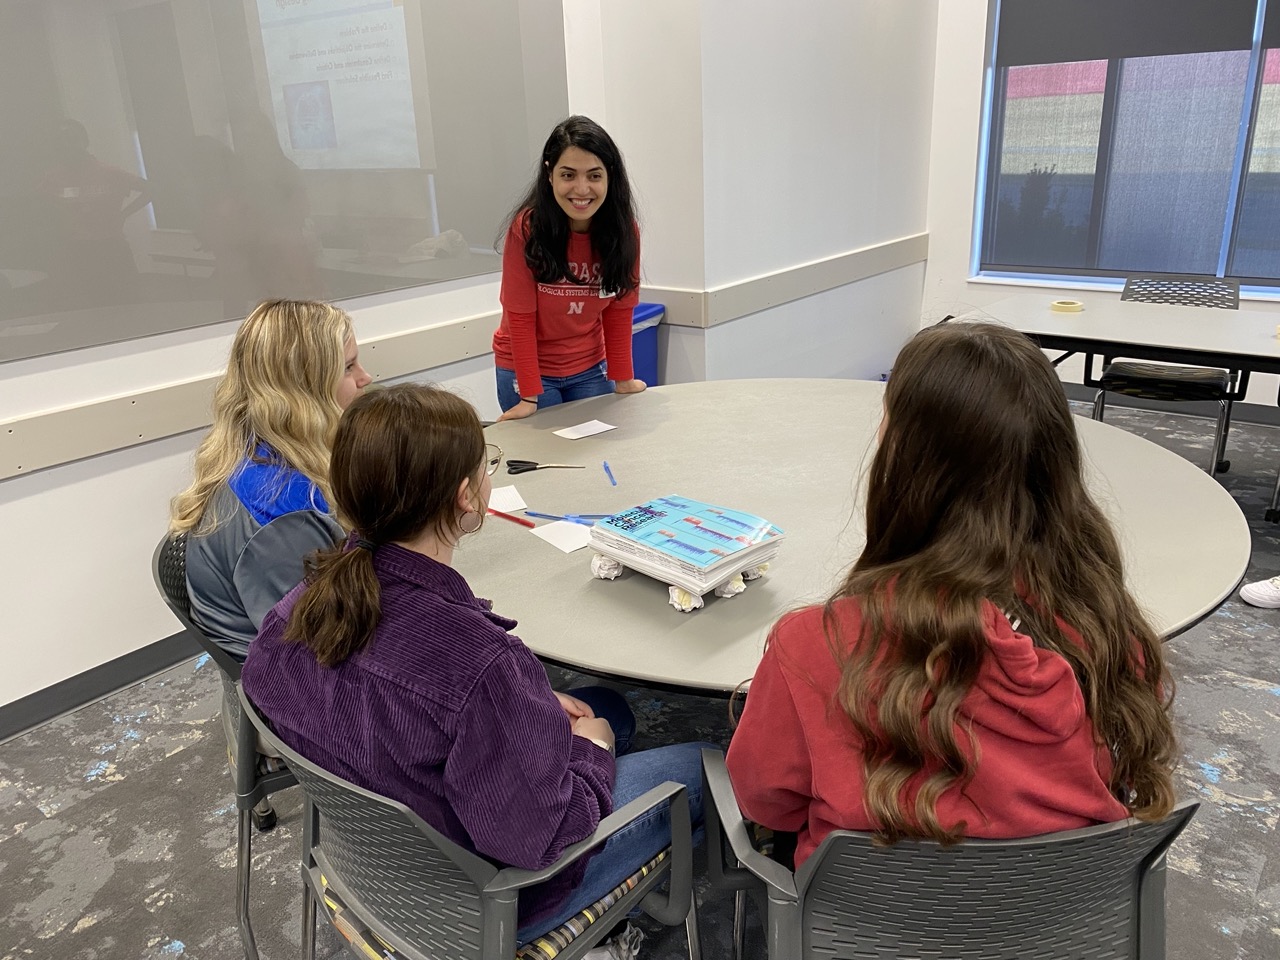 Introducing high school girls to the world of engineering by running a Women in STEM event! Graduate student Samereh Soleimani (shown in picture) is working on increasing STEM outreach through this event. They were tasked to build a structural support using provided materials.